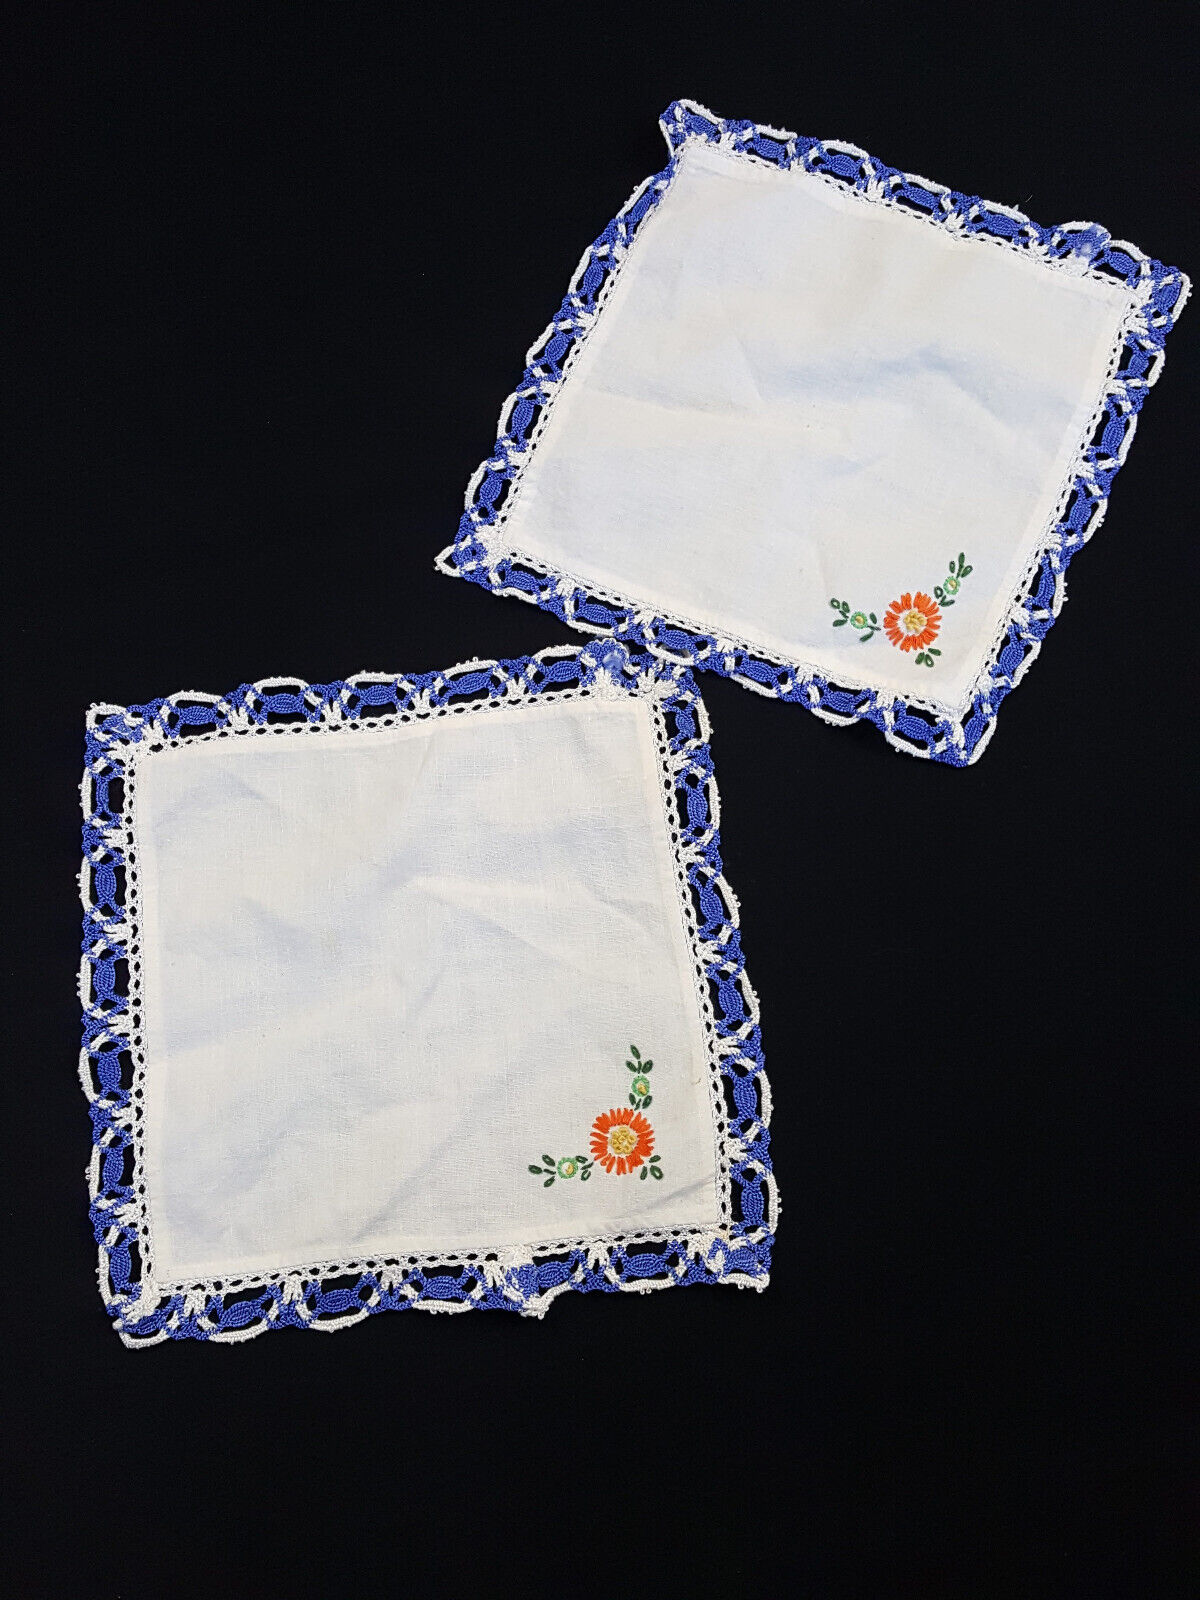 Lot of 2 Vintage Embroidered Crochet Lace Blue White Square Table Decor